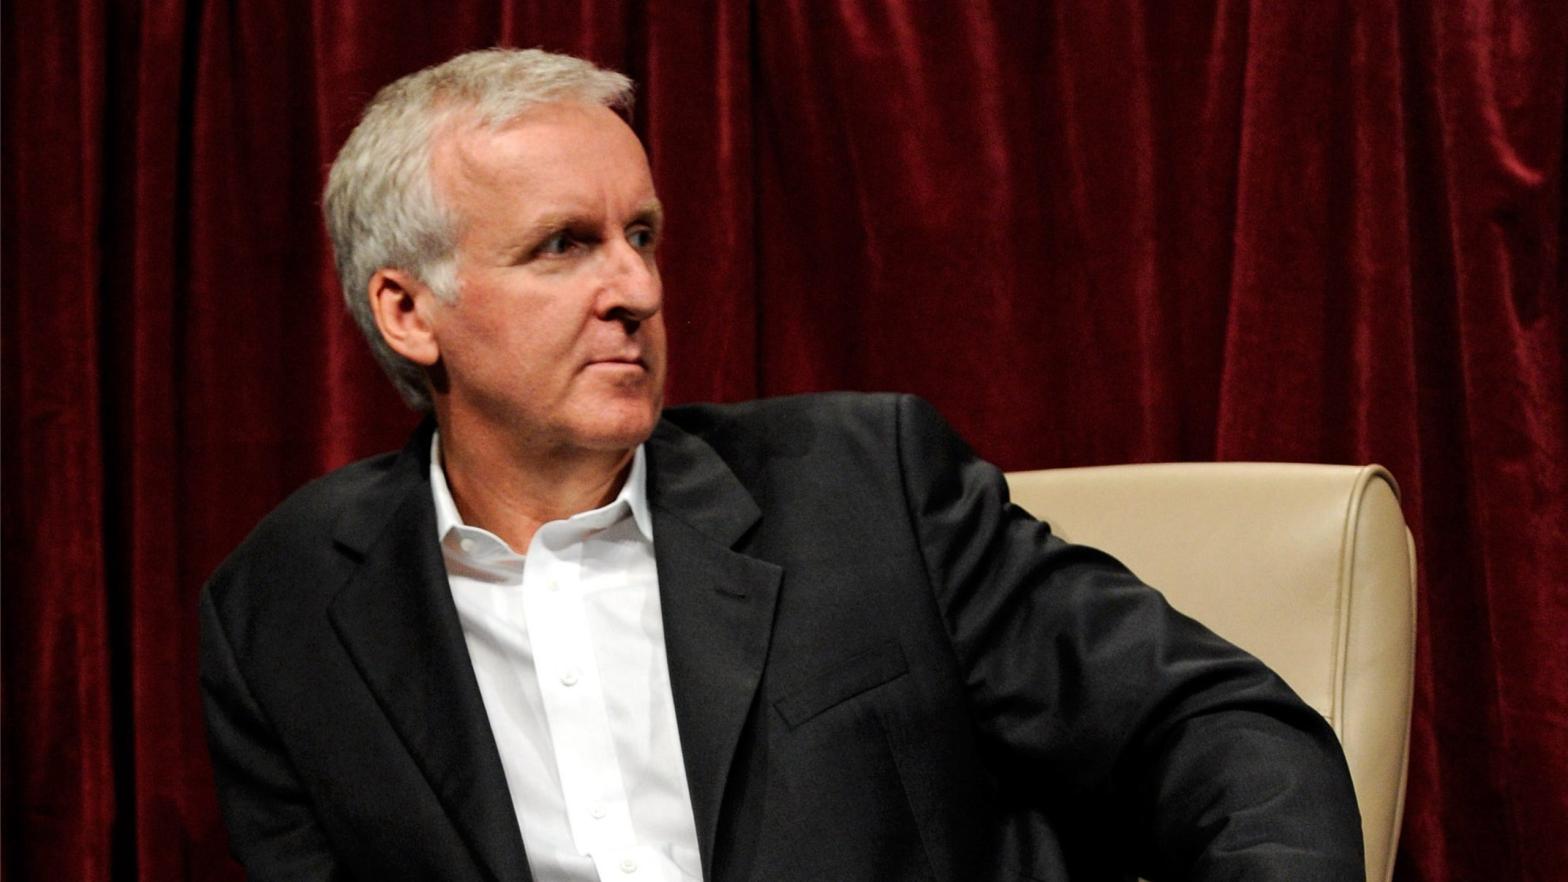 James Cameron at a digital filmmakers forum during CinemaCon on March 30, 2011. (Photo: Ethan Miller, Getty Images)